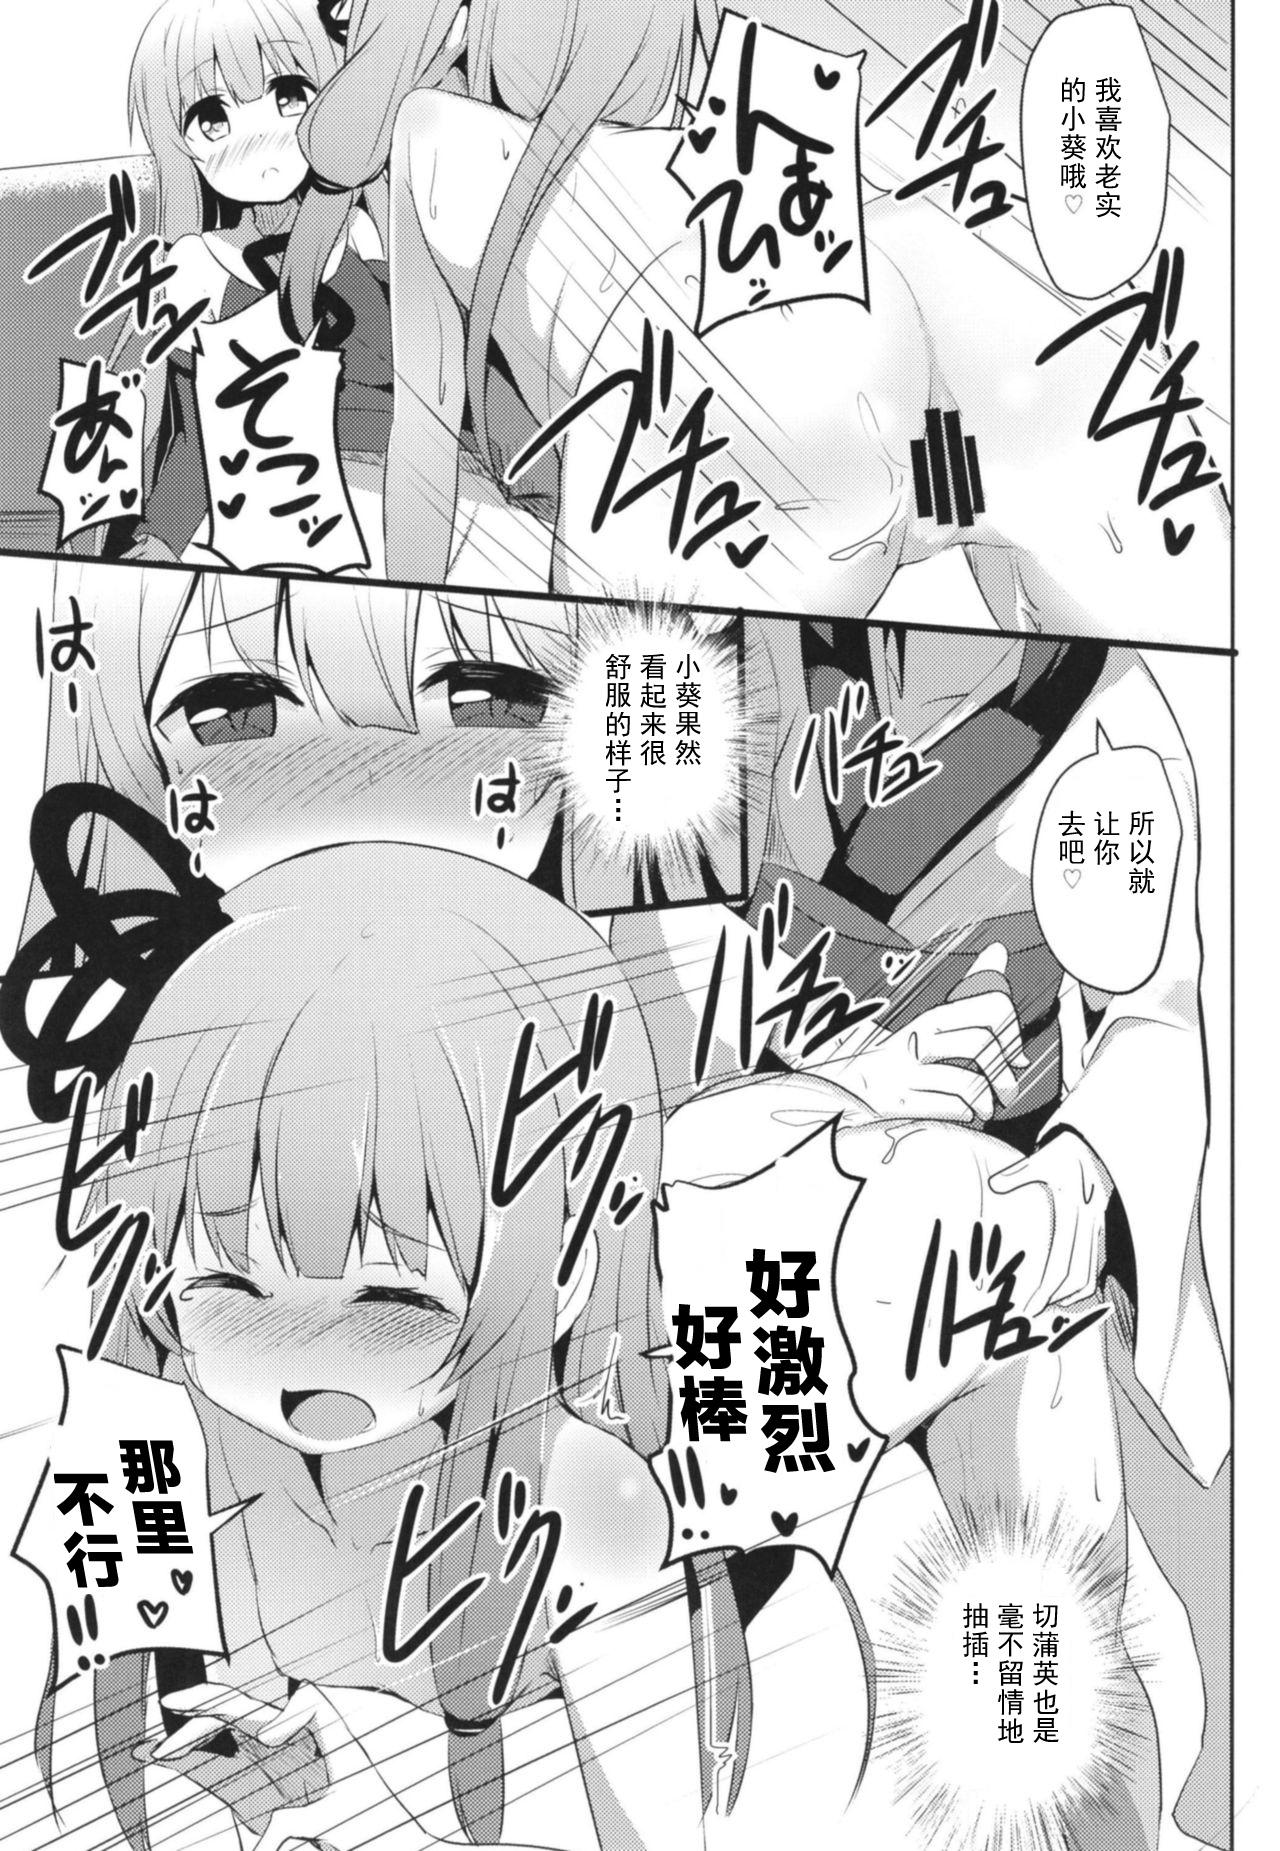 Banging [Milk Pudding (Jamcy)] Akane-chan Challenge! 4-kaime (VOICEROID) [Chinese] [古早个人汉化] [Digital] - Voiceroid Amateurs - Page 11